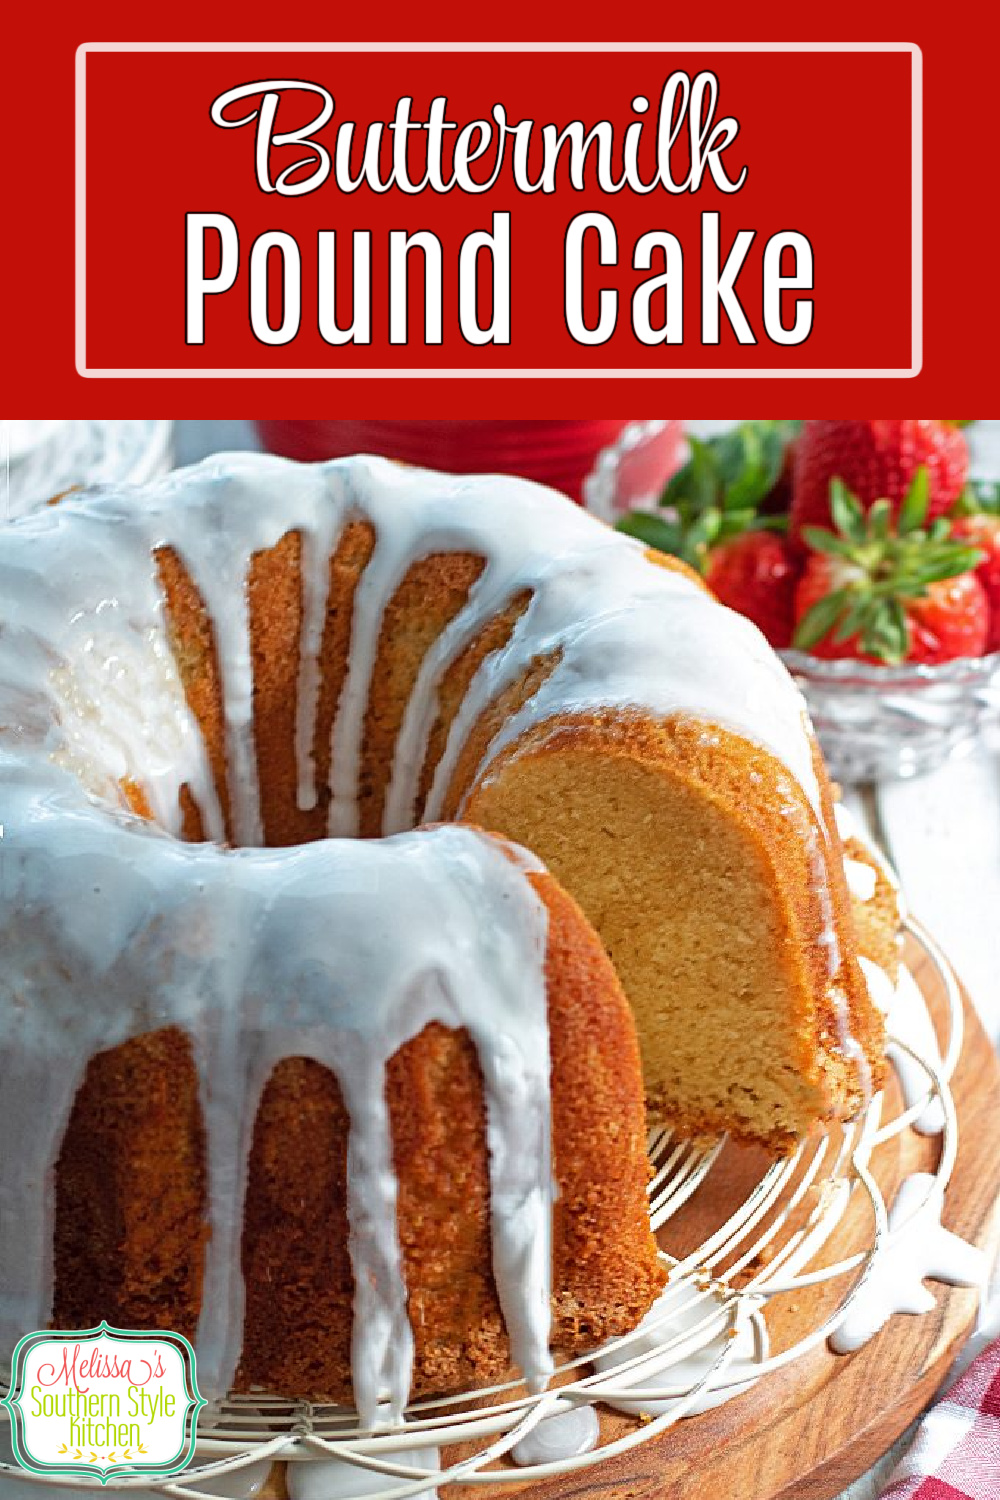 This scratch made Buttermilk Pound Cake can be served as is, or with fresh berries and cream for a tried and true Southern style dessert #poundcake #buttermilkpoundcake #cakes #cakerecipes #southernpoundcake #buttermilkcake #easypoundcakerecipe